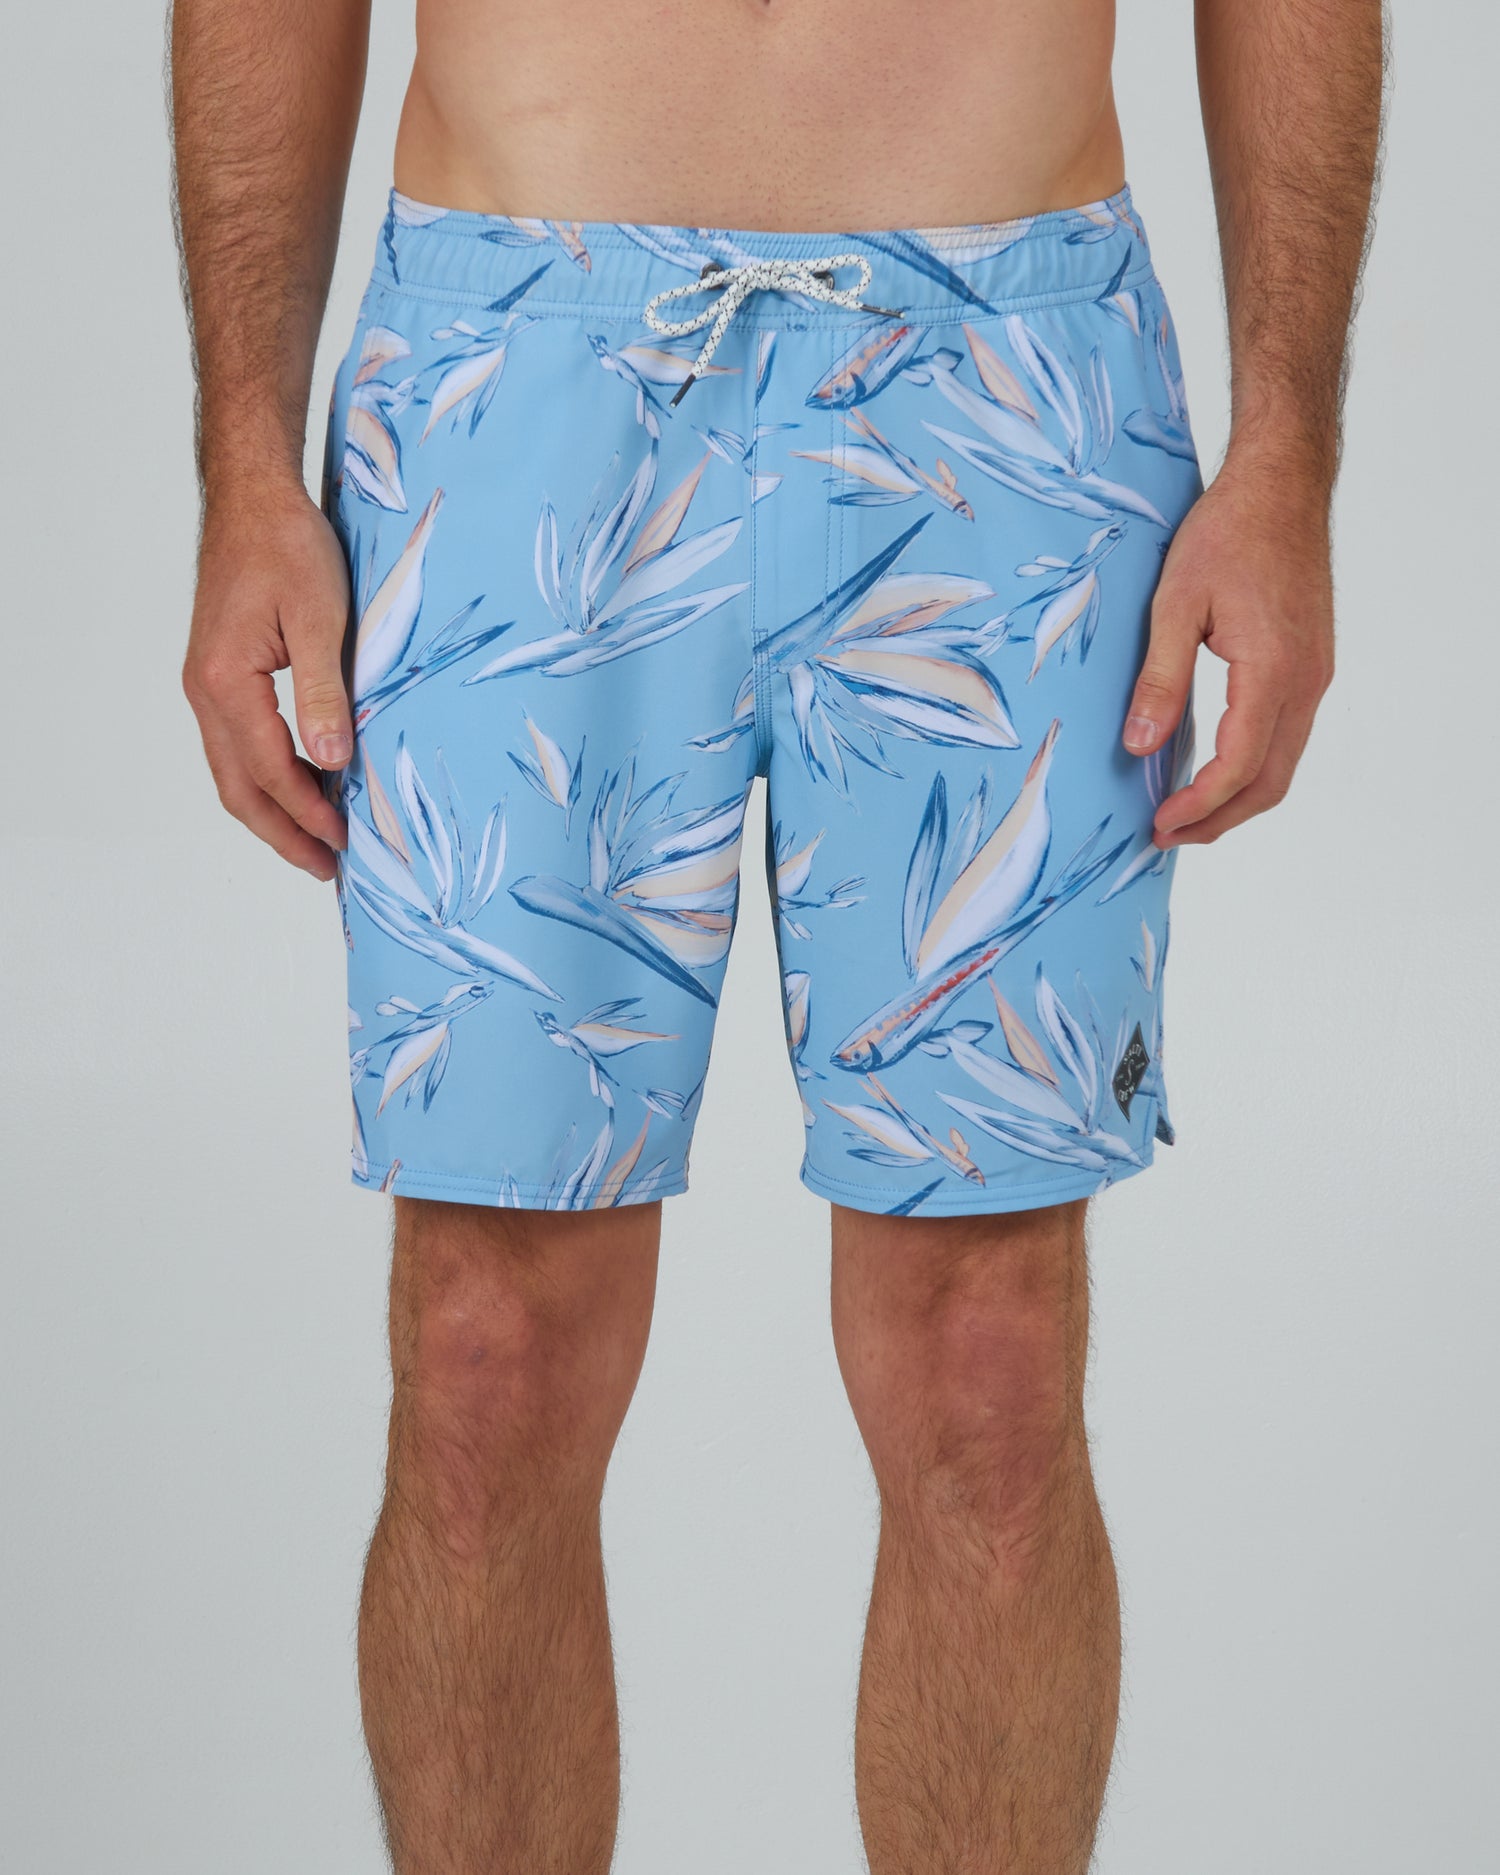 front view of Lowtide Blue Elastic Boardshort